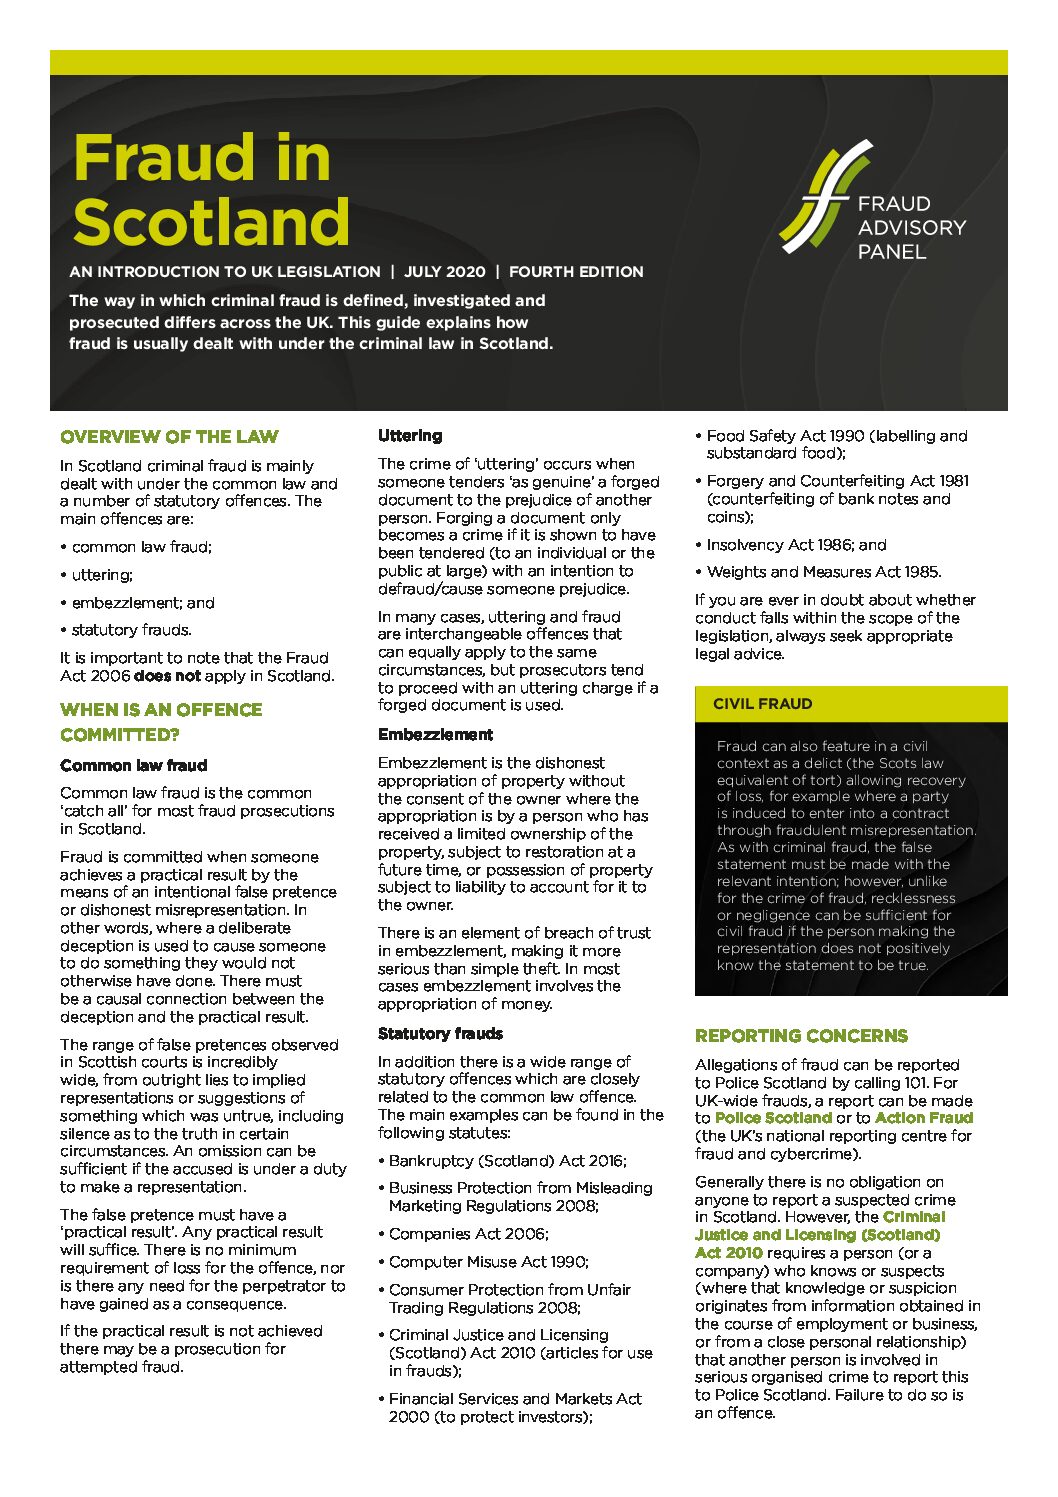 Fraud-in-Scotland-4th-ed-July2020 document cover